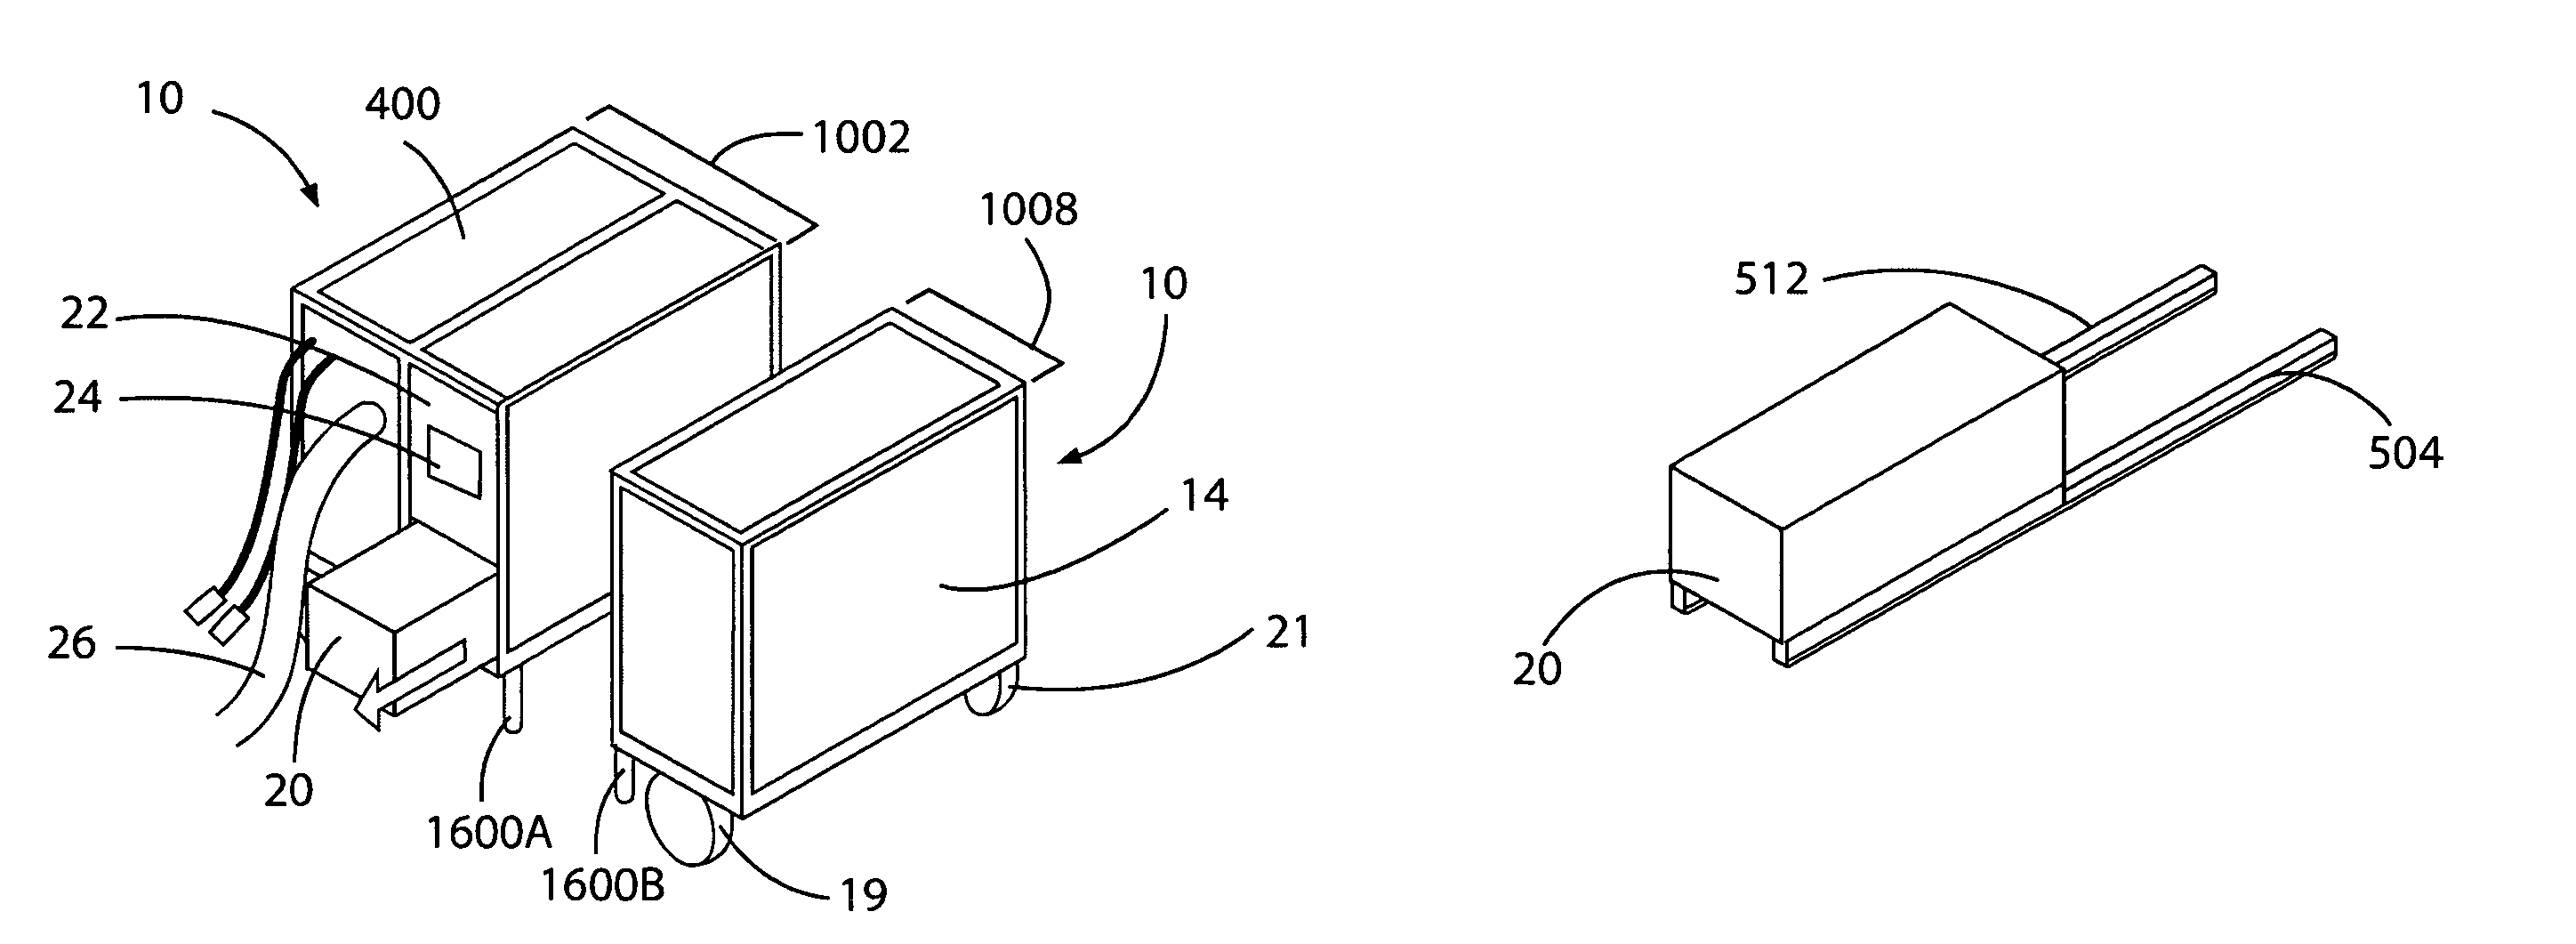 Airplane ground support equipment cart having extractable modules and a generator module that is seperable from power conversion and air conditioning modules